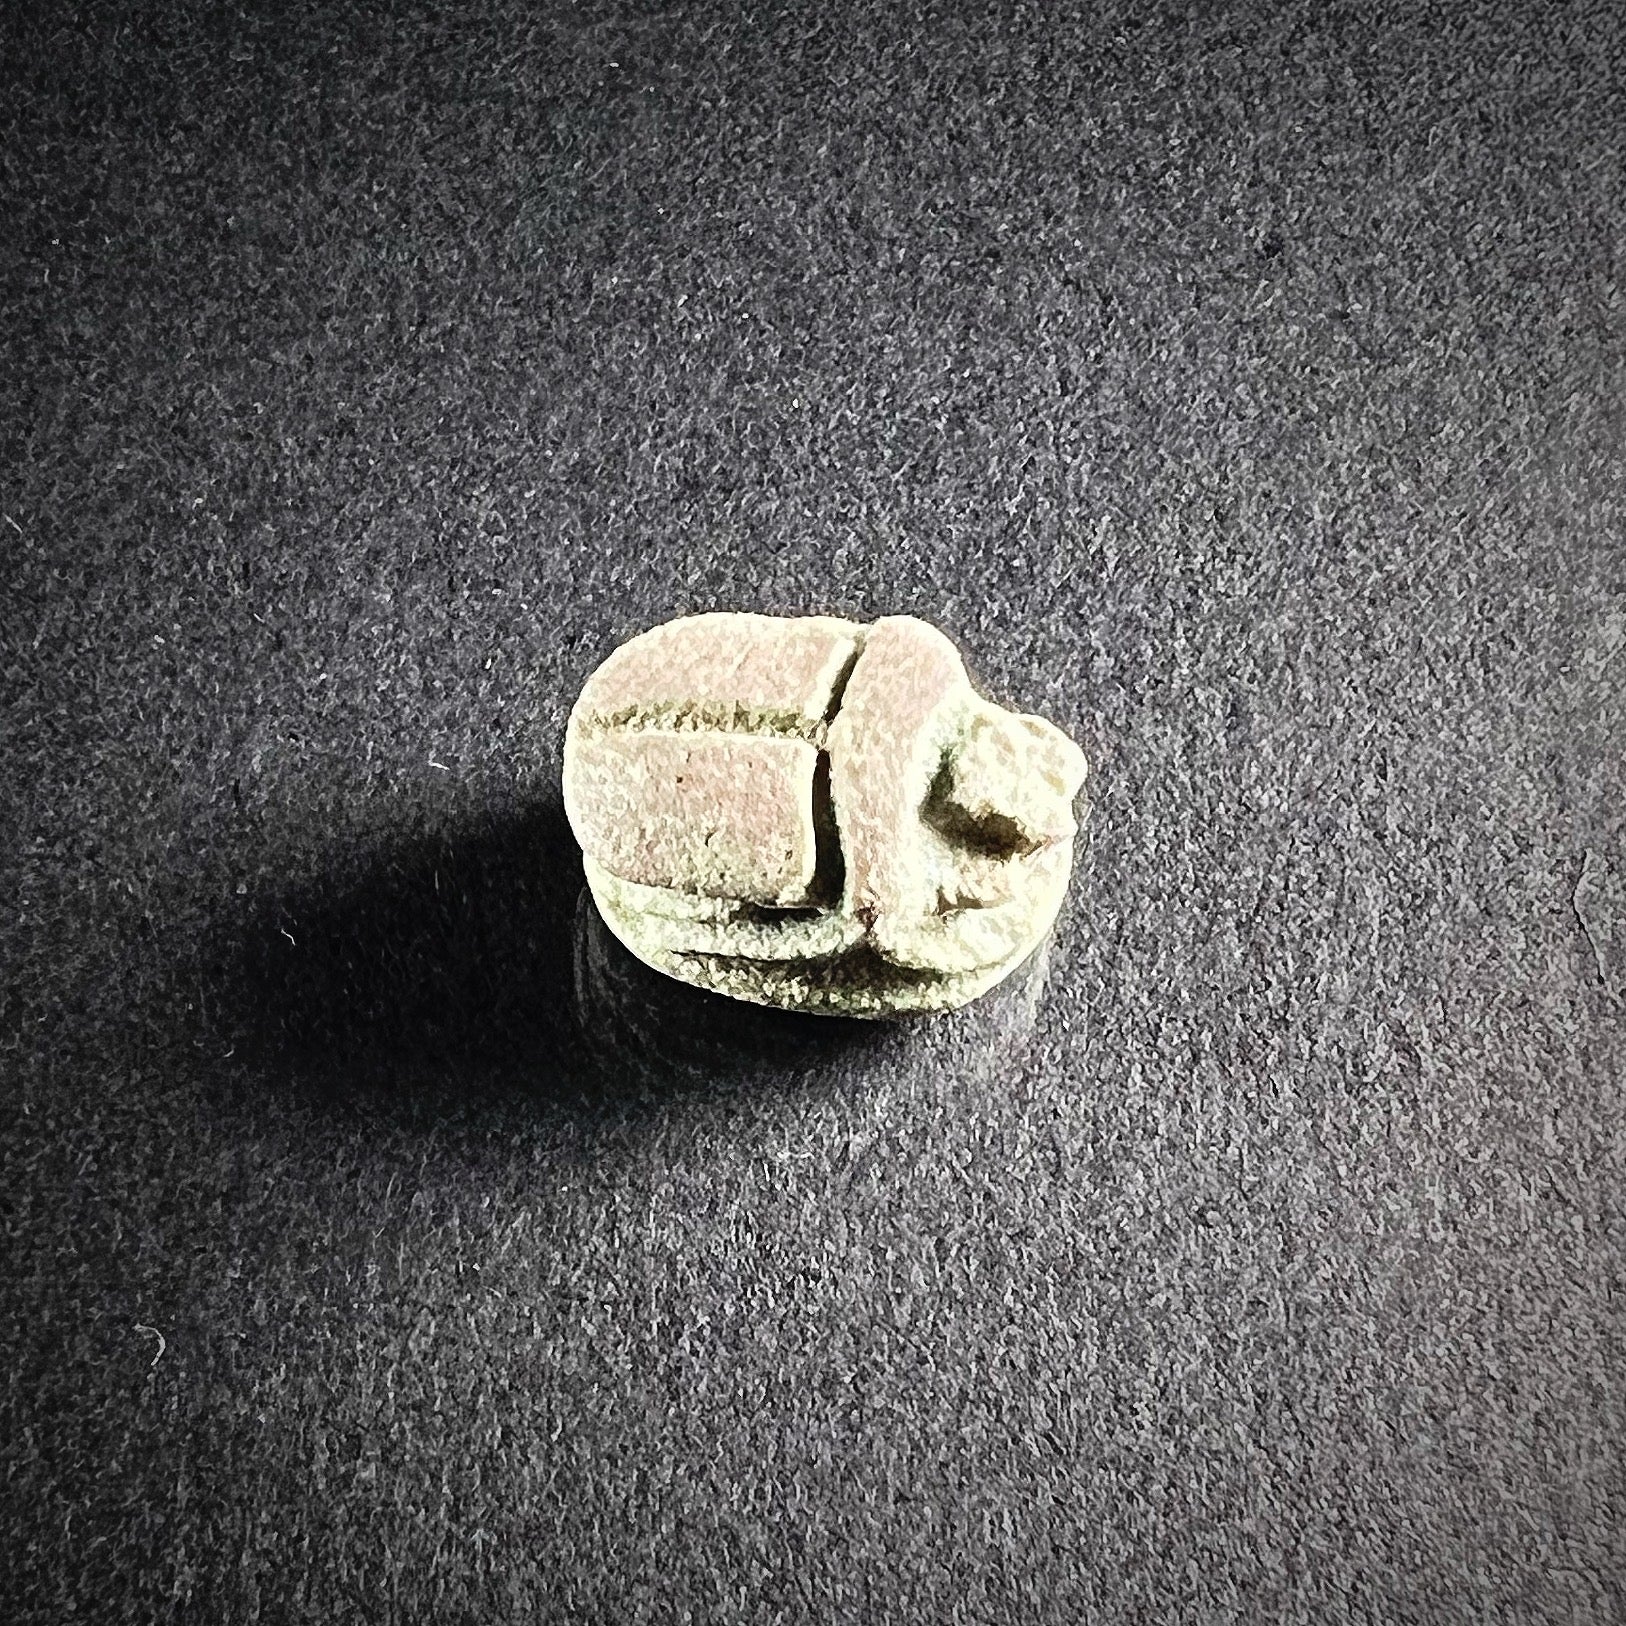 Ancient scarab of faience - side view